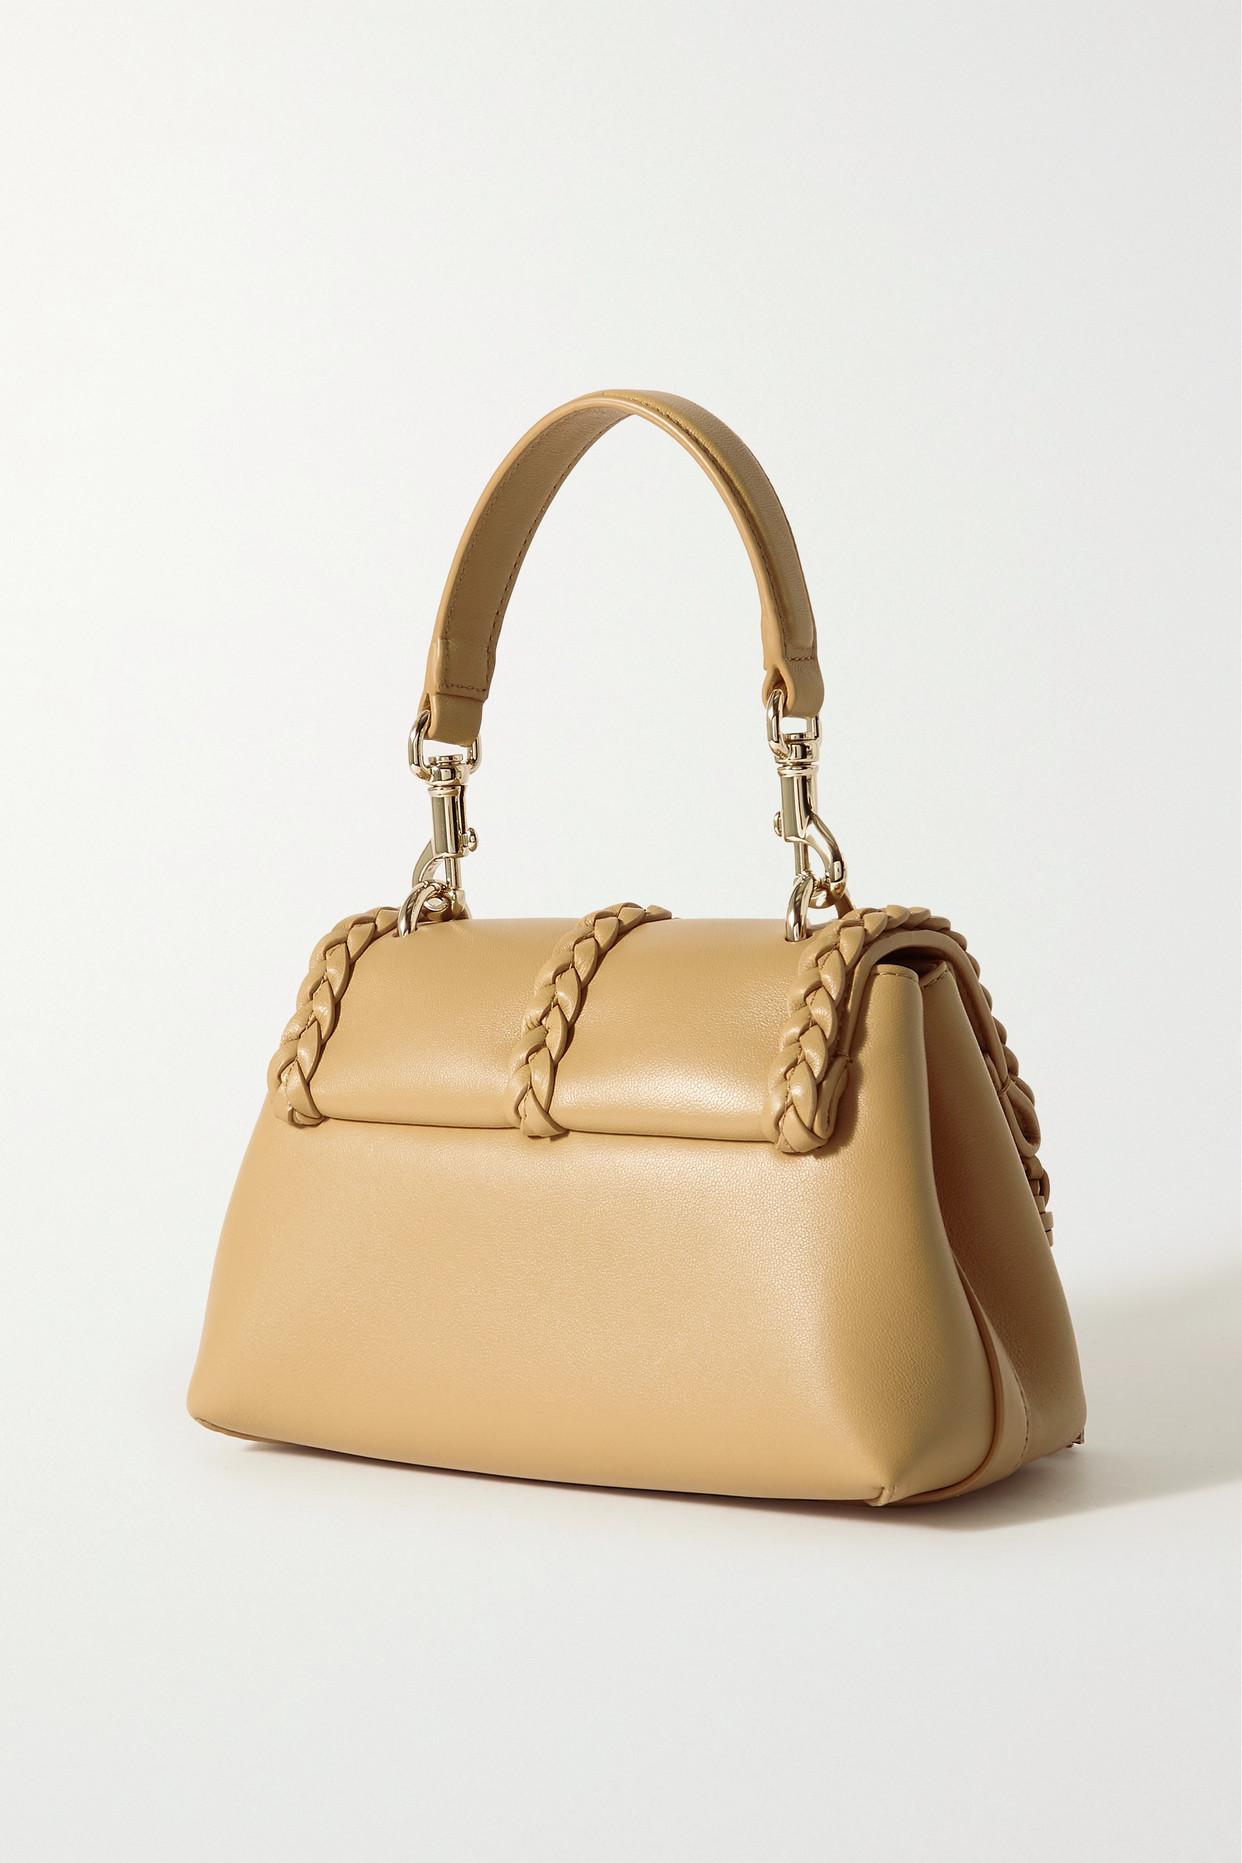 Chloé + Net Sustain Penelope Mini Braided Leather Shoulder Bag in Natural